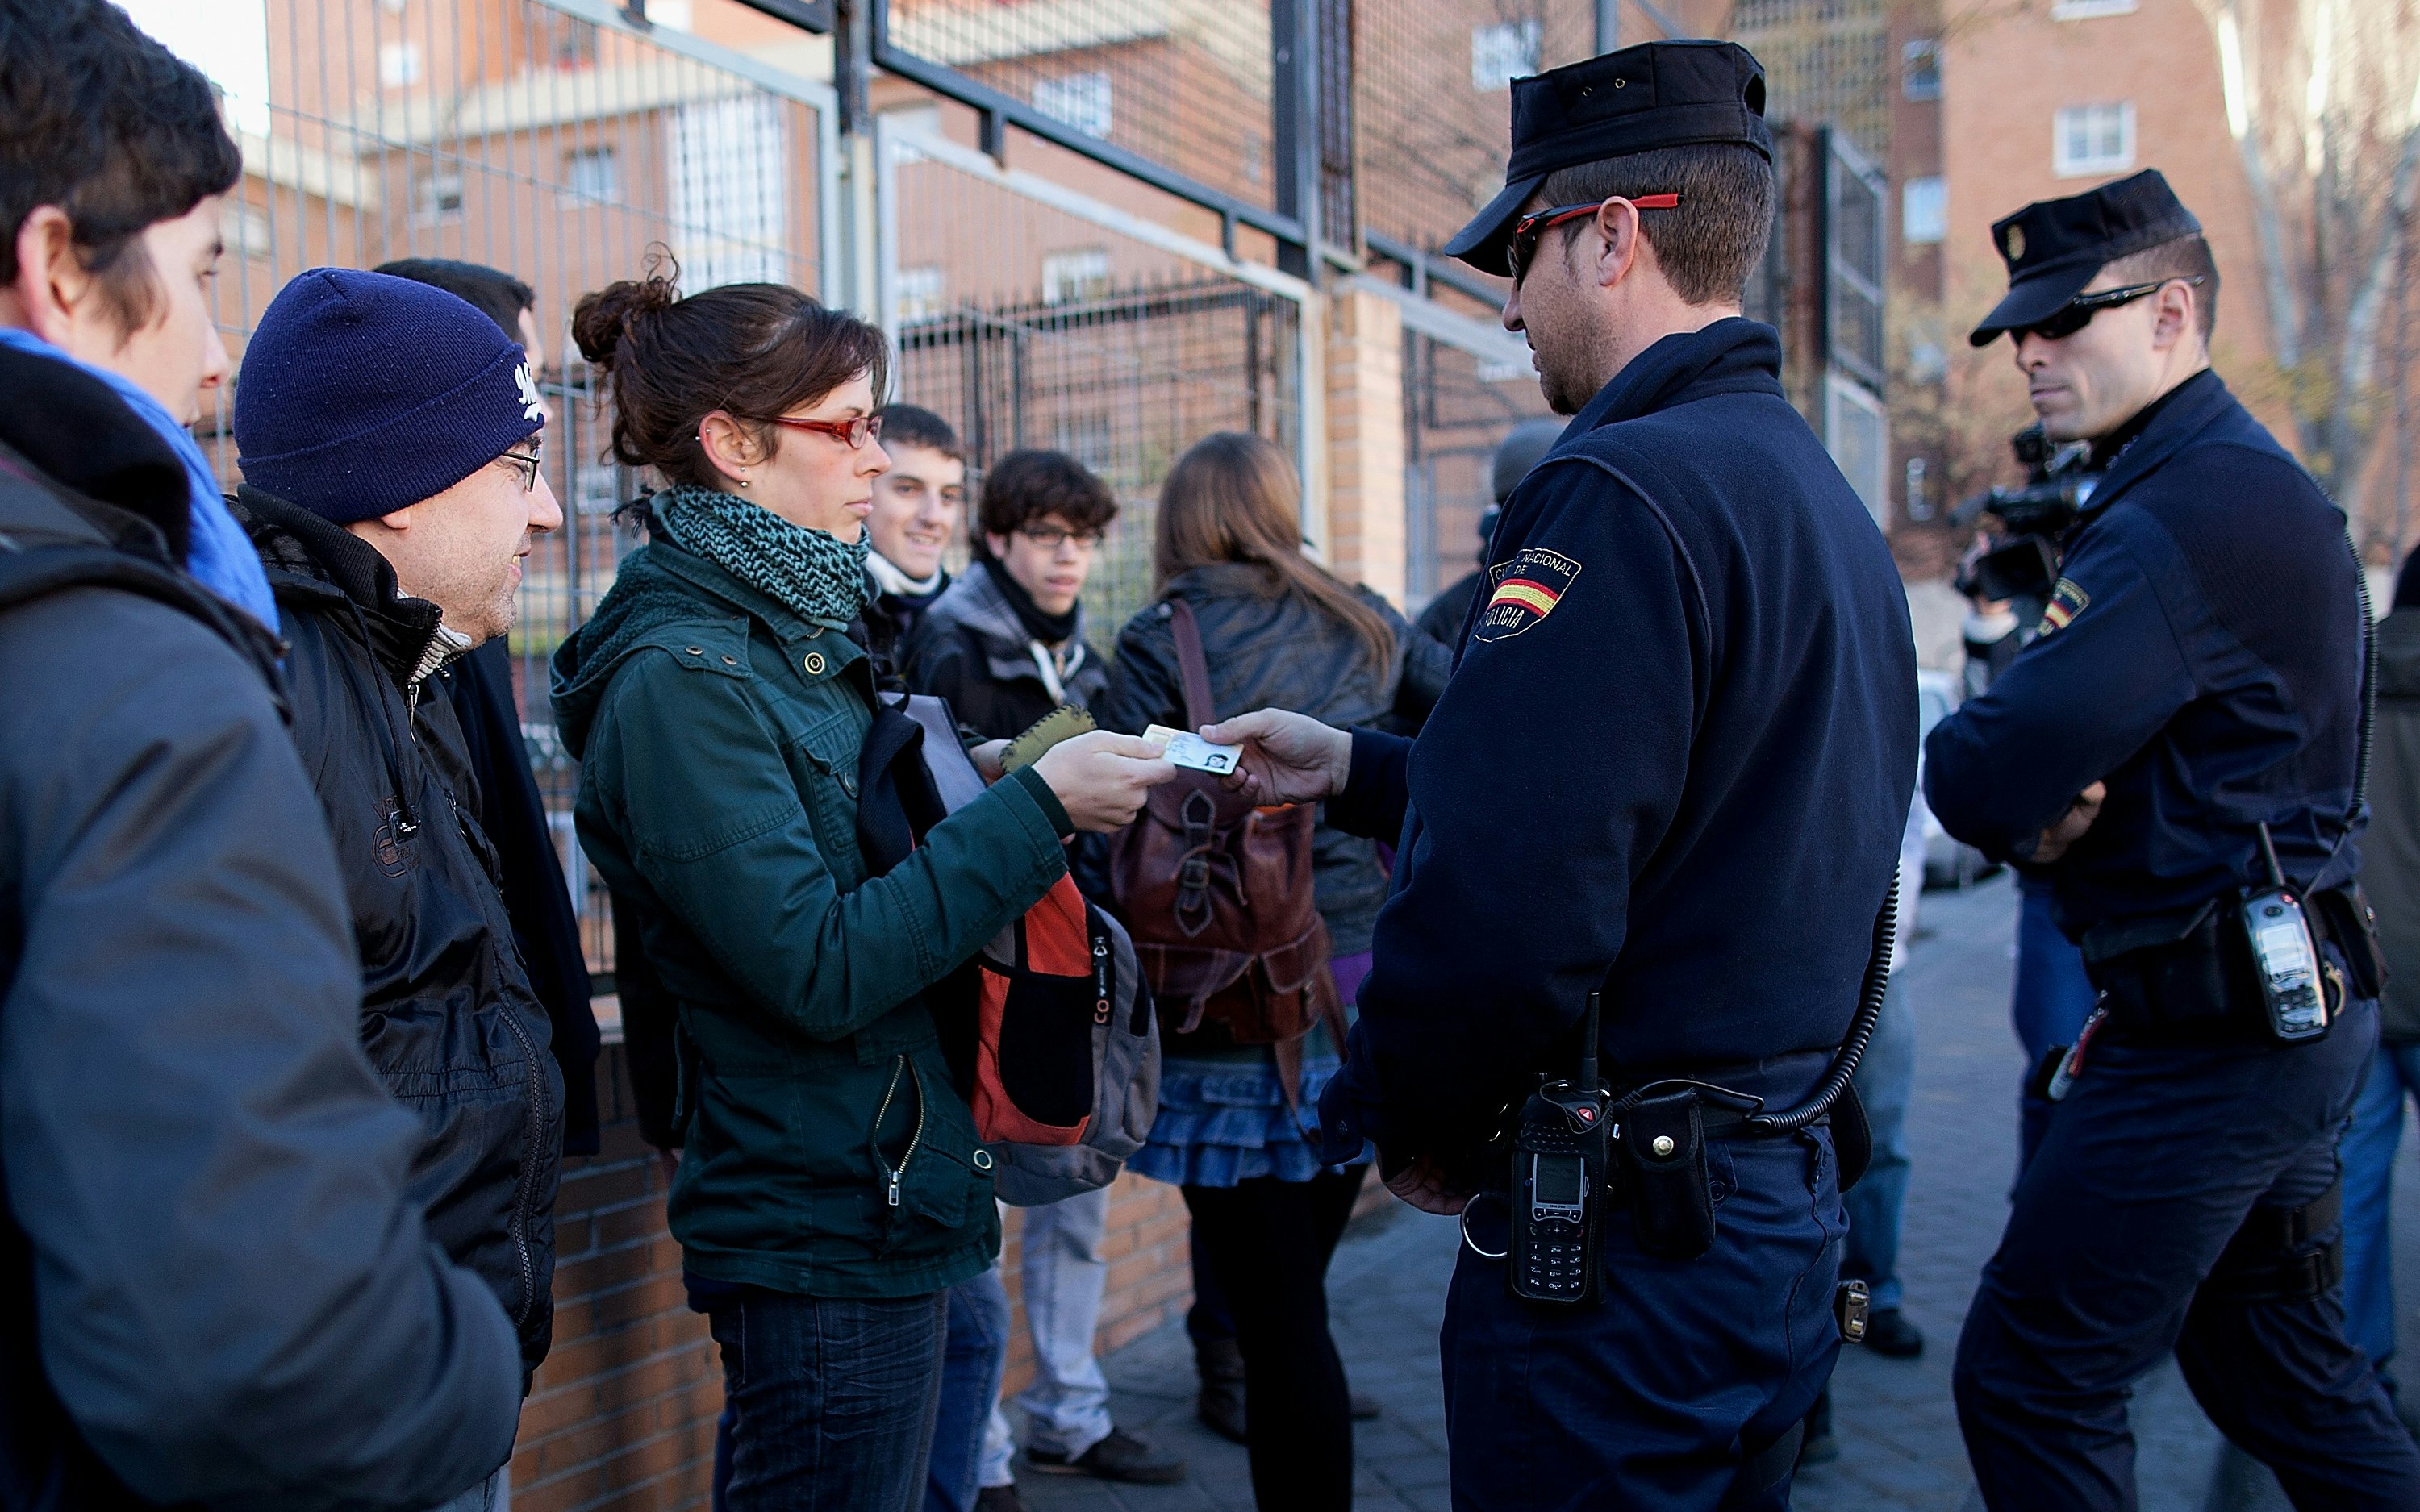 A woman in a group handing her identification card to a police officer